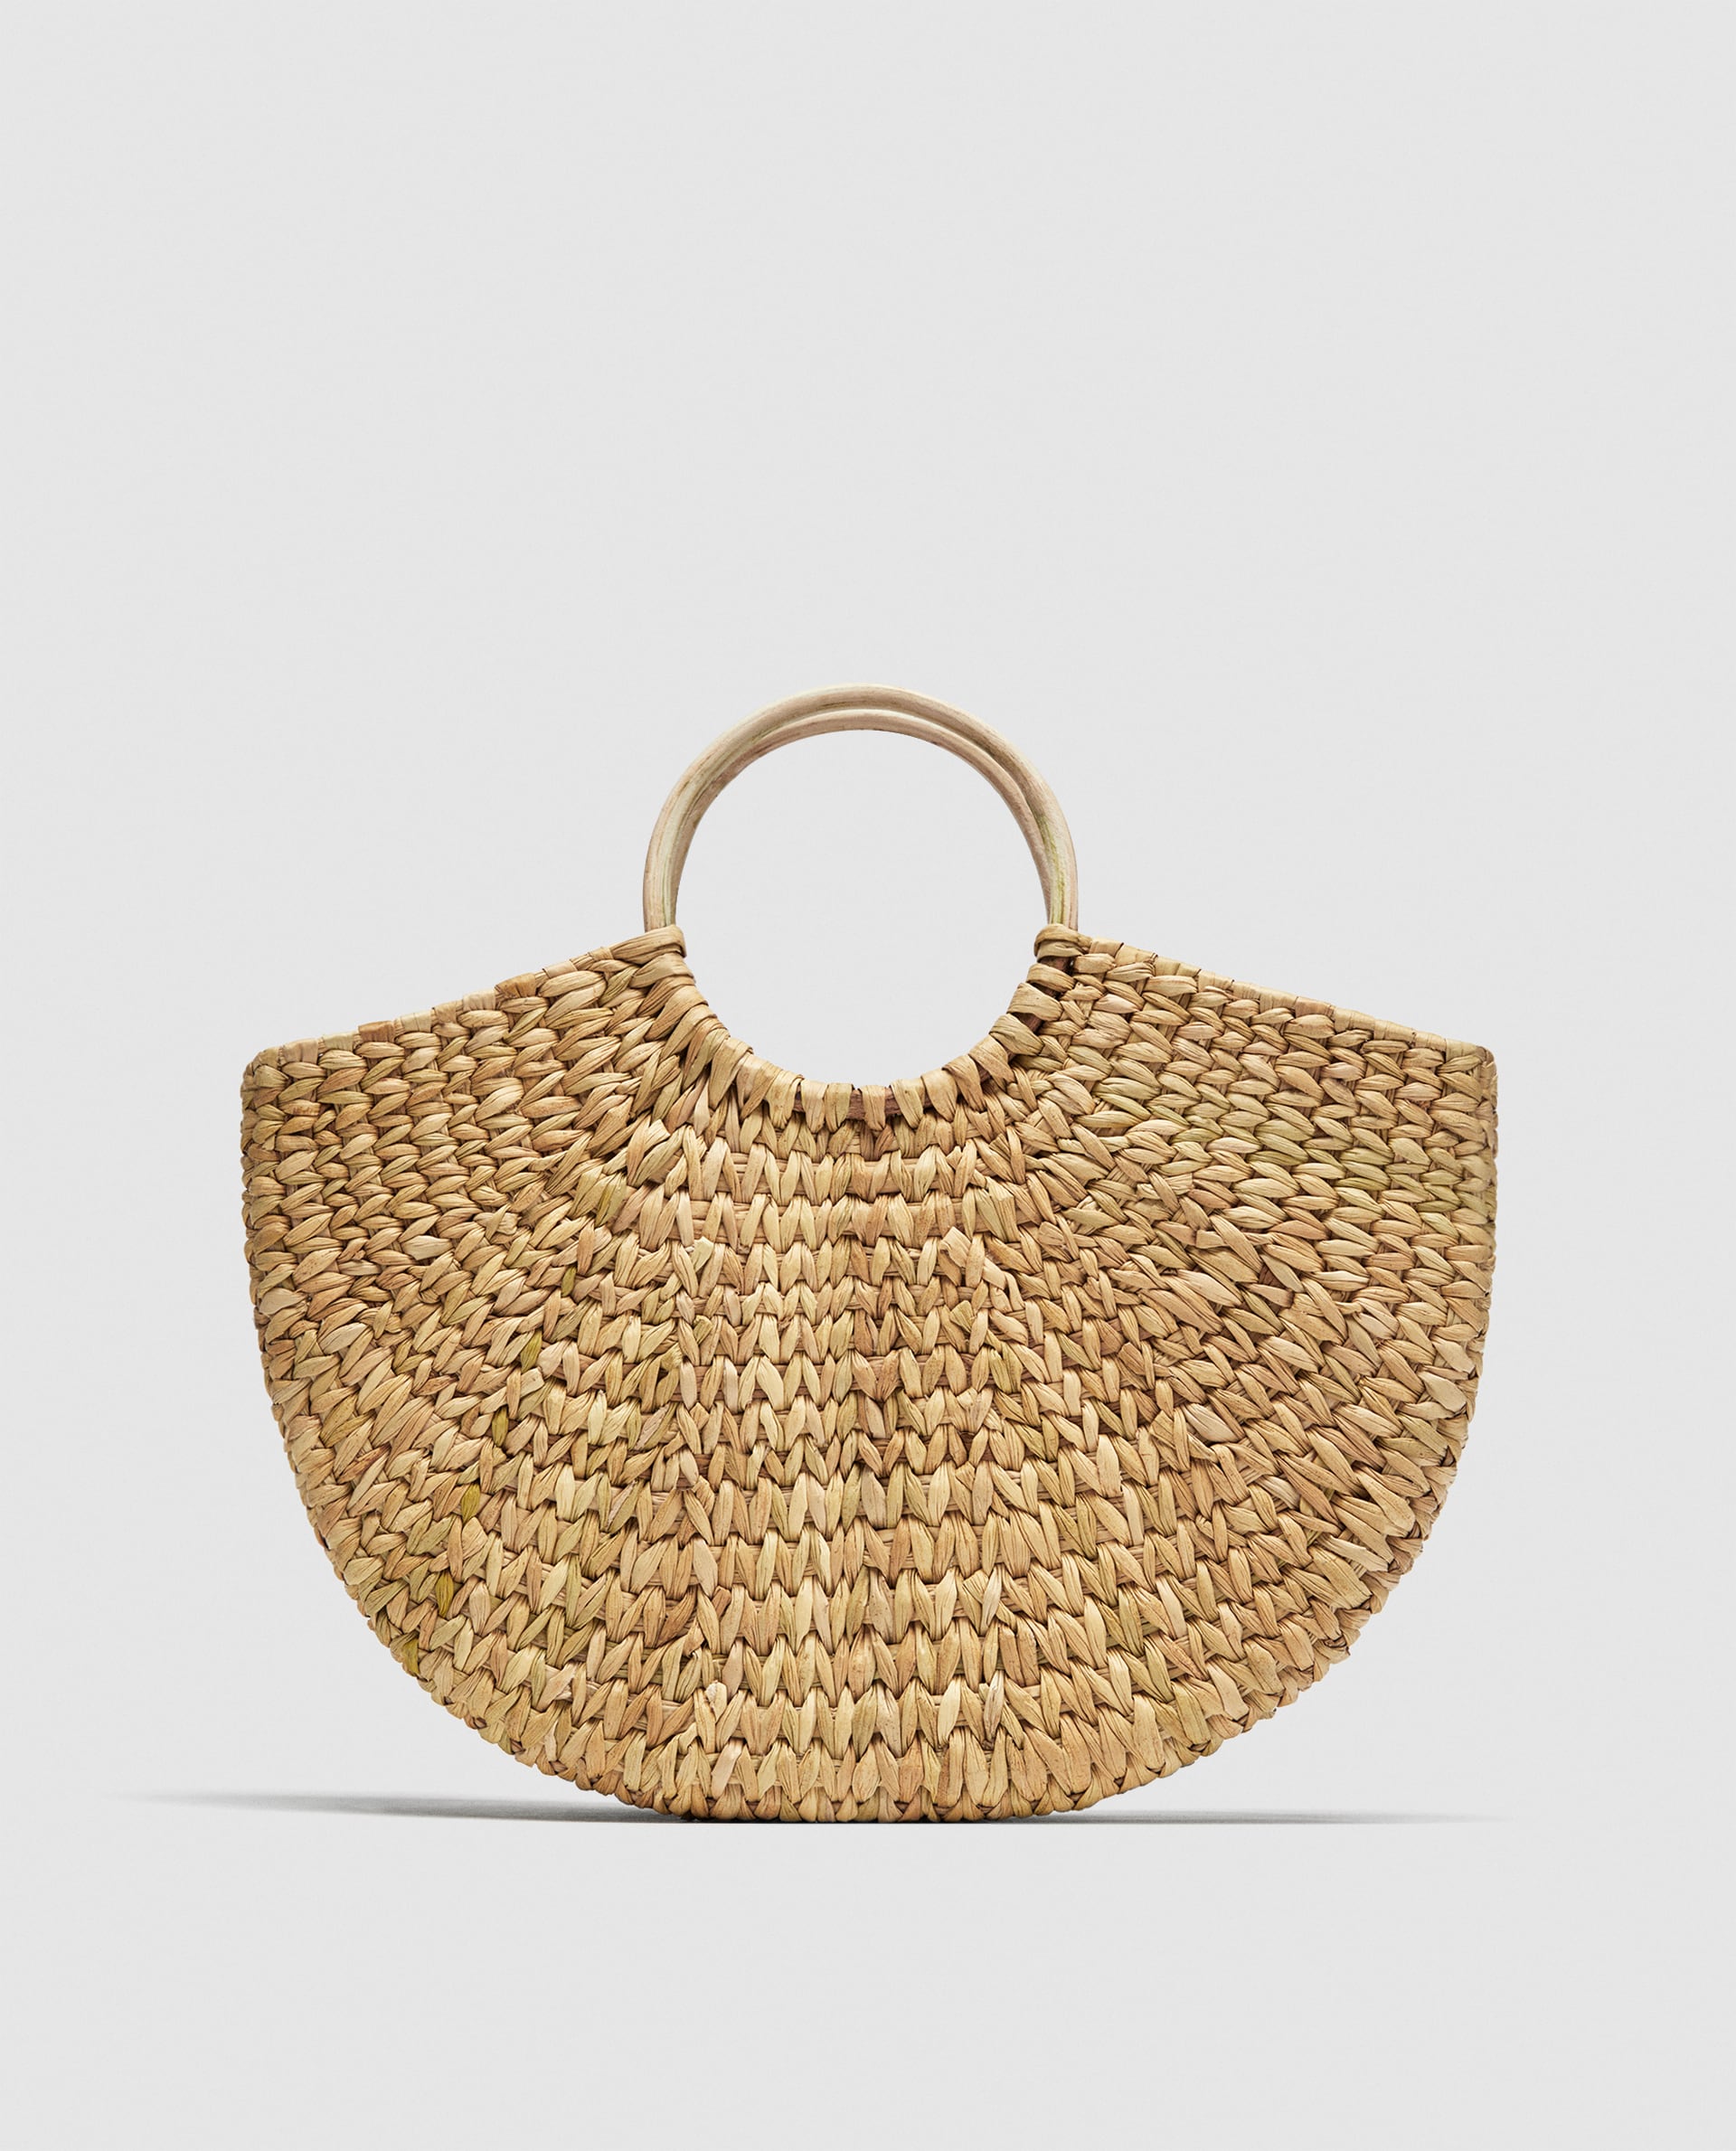 Zara straw bag with rounded handles